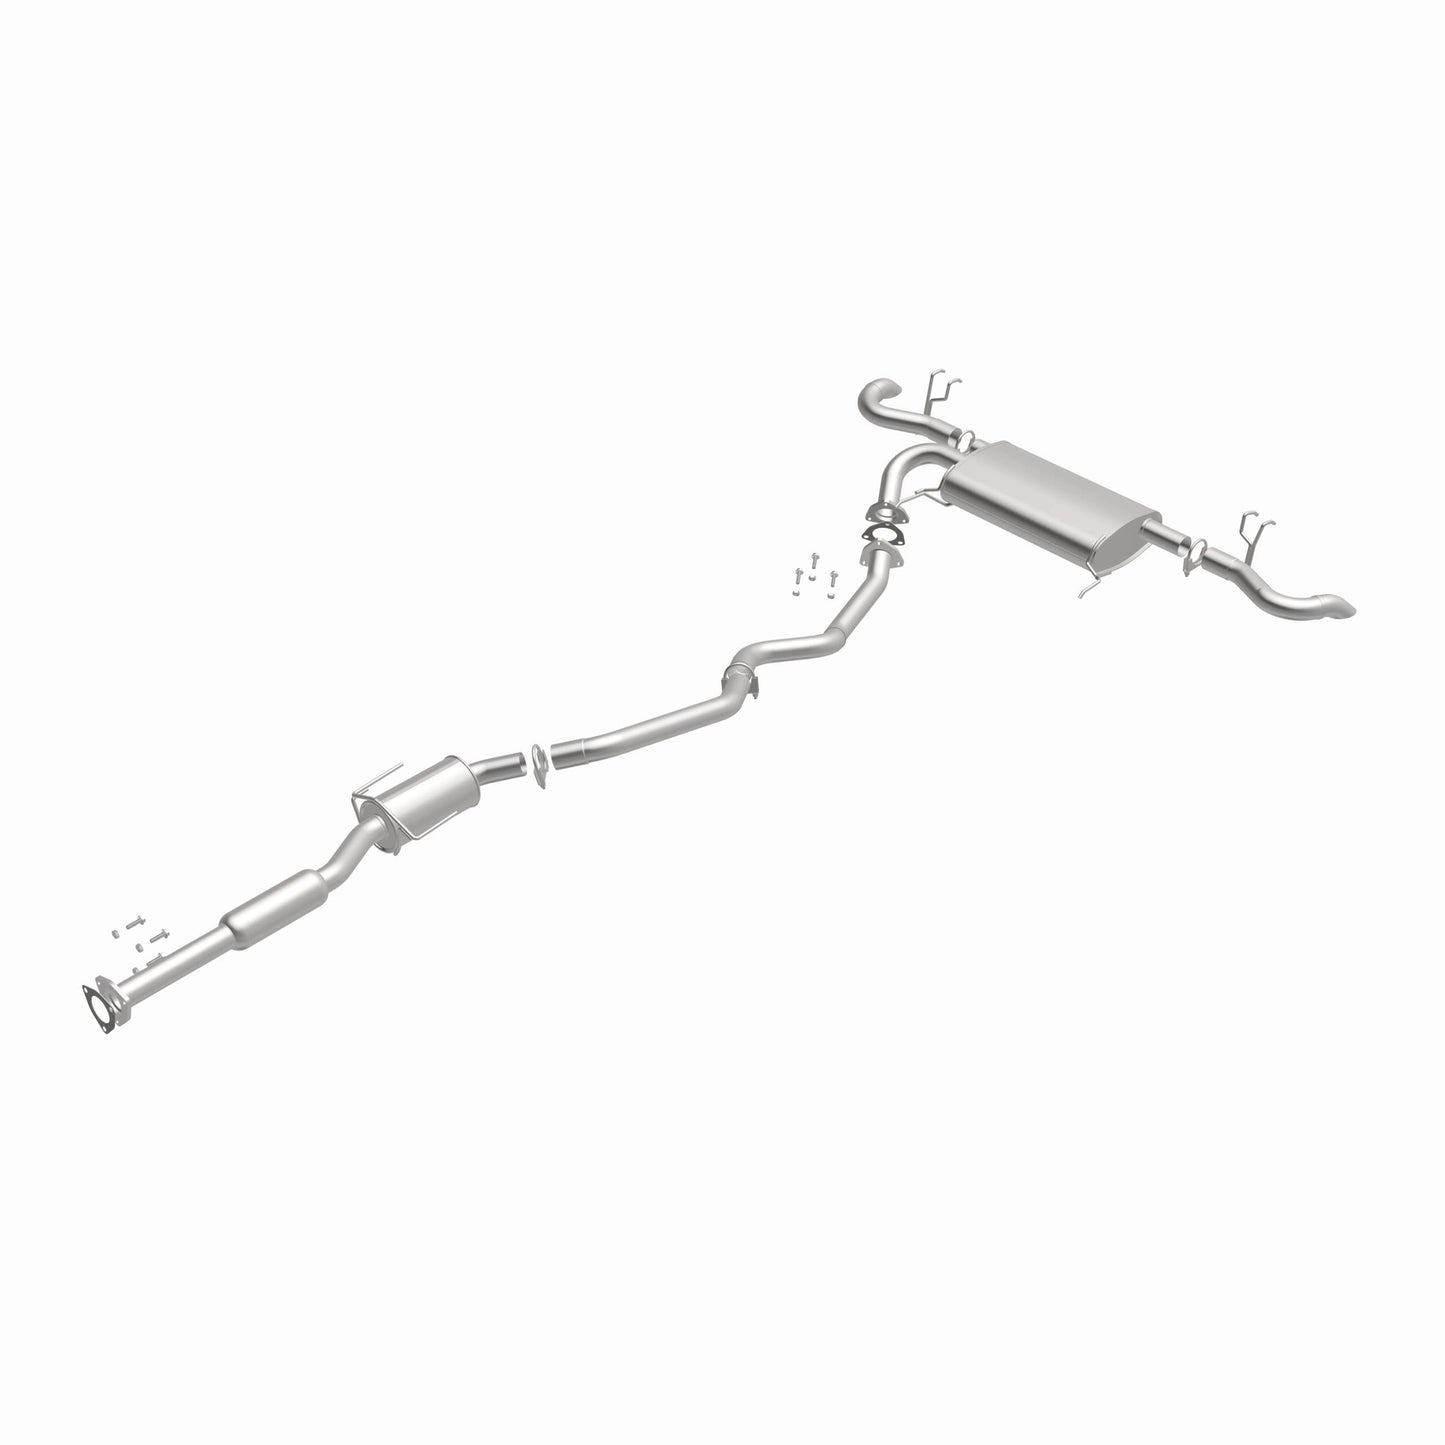 Fits 2013-2017 Acura RDX 3.5L Direct-Fit Replacement Exhaust System 106-0812